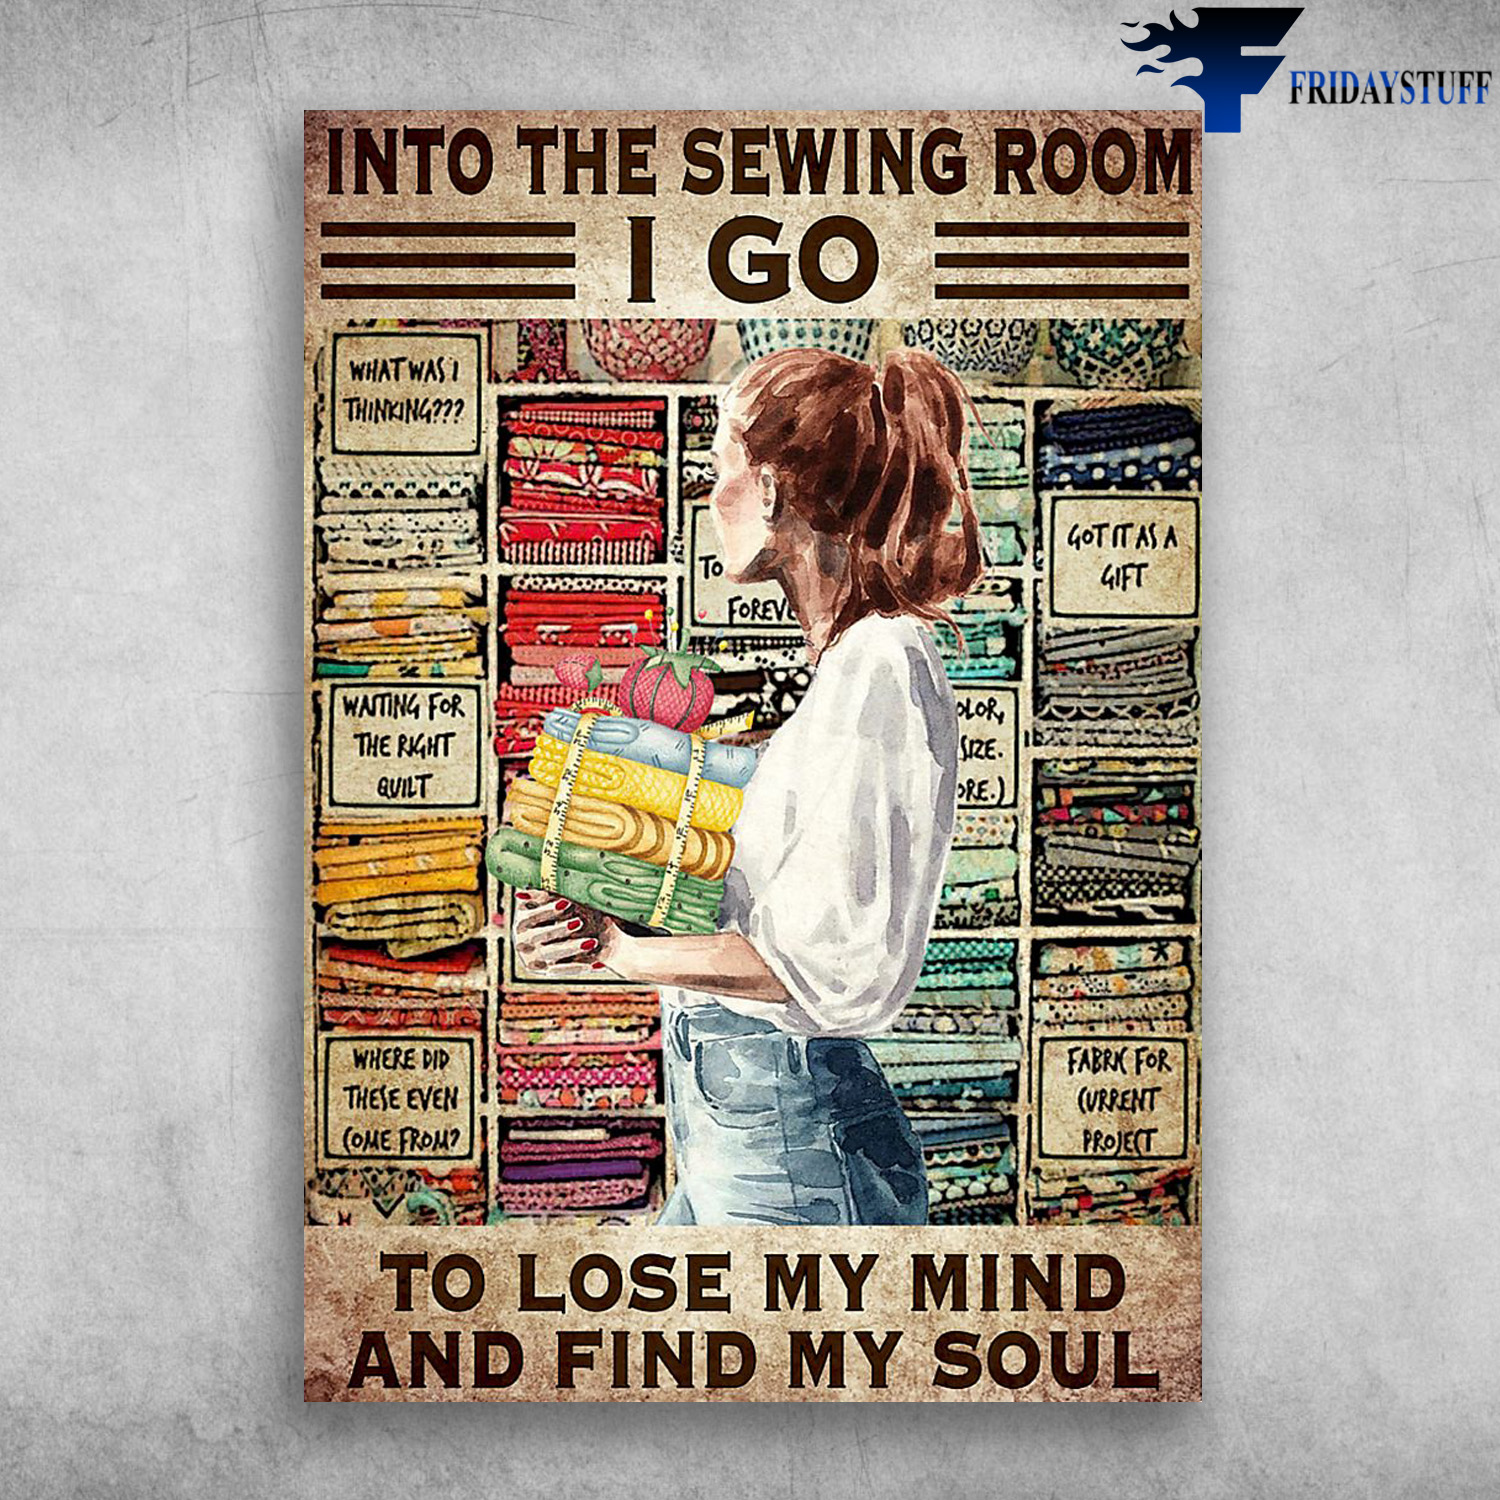 Sewing Girl - Into The Sewing Room, I Go To Lose My Mind And Find My Soul, What Was I Thinking, Got It As A Gift, Waiting For The Right Guilt, Where Did These Even Come From,